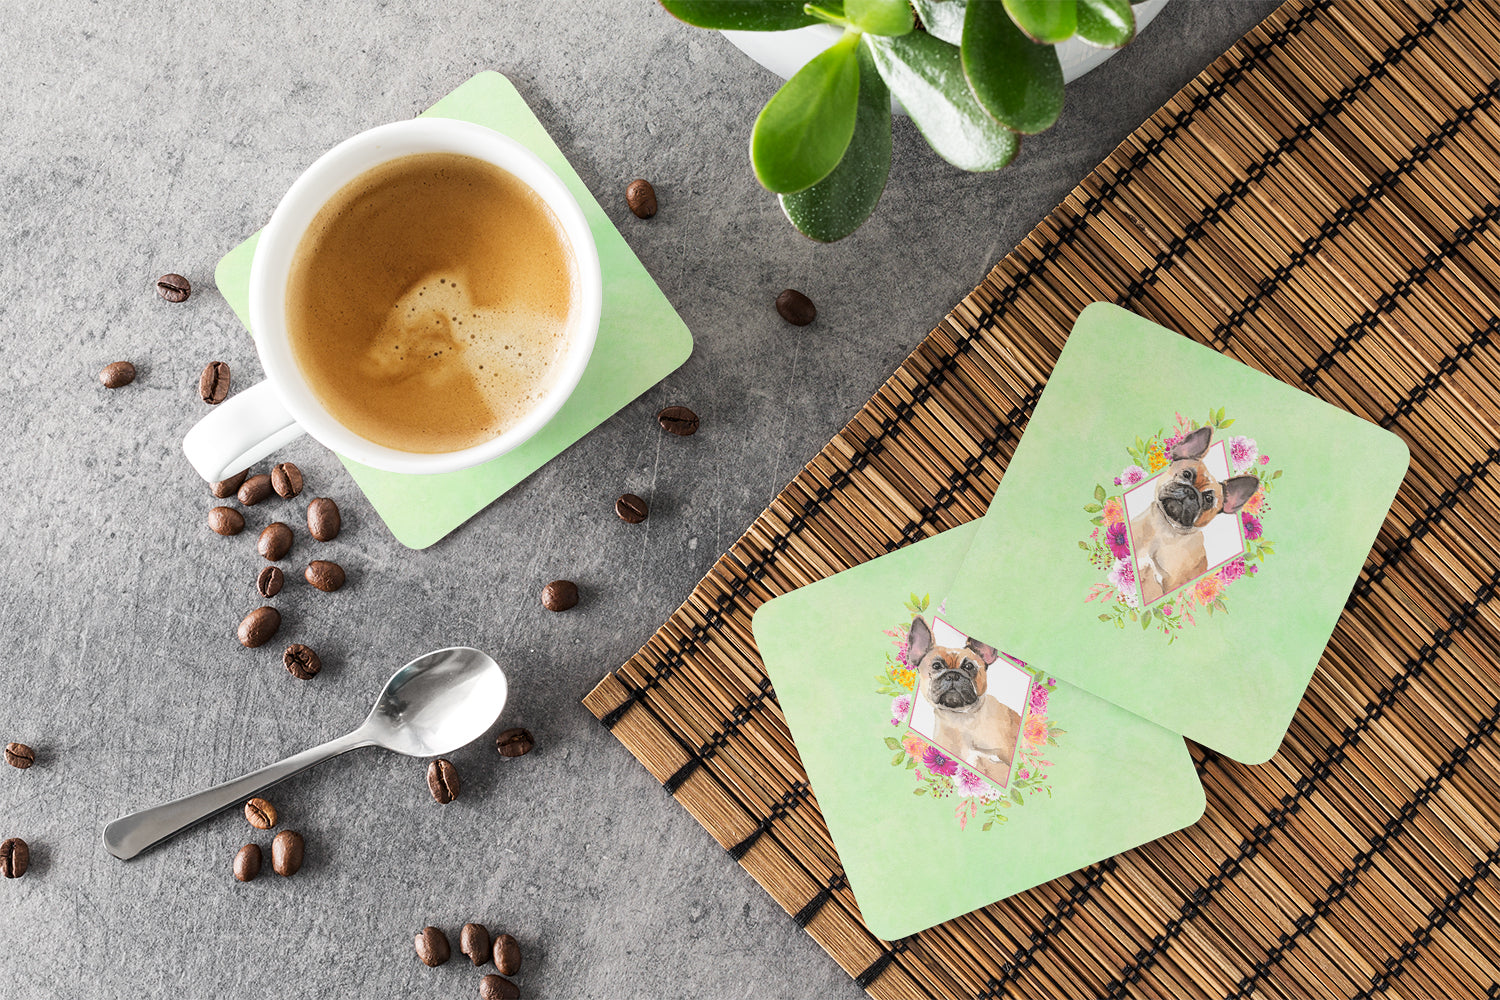 Set of 4 Fawn French Bulldog Green Flowers Foam Coasters Set of 4 CK4398FC - the-store.com